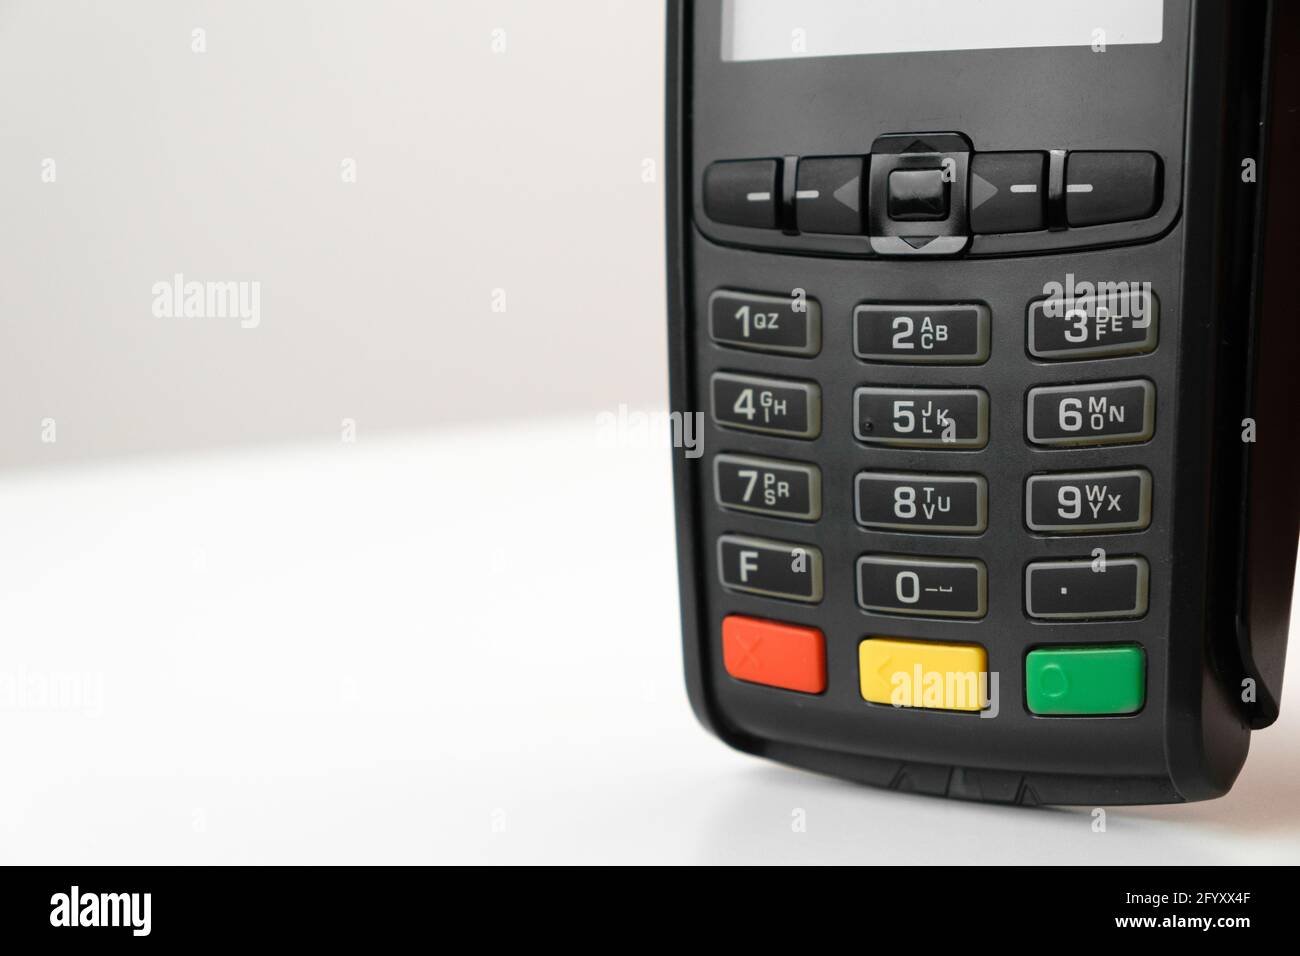 POS terminal or credit card reader machine on the white table with copy space.  Stock Photo